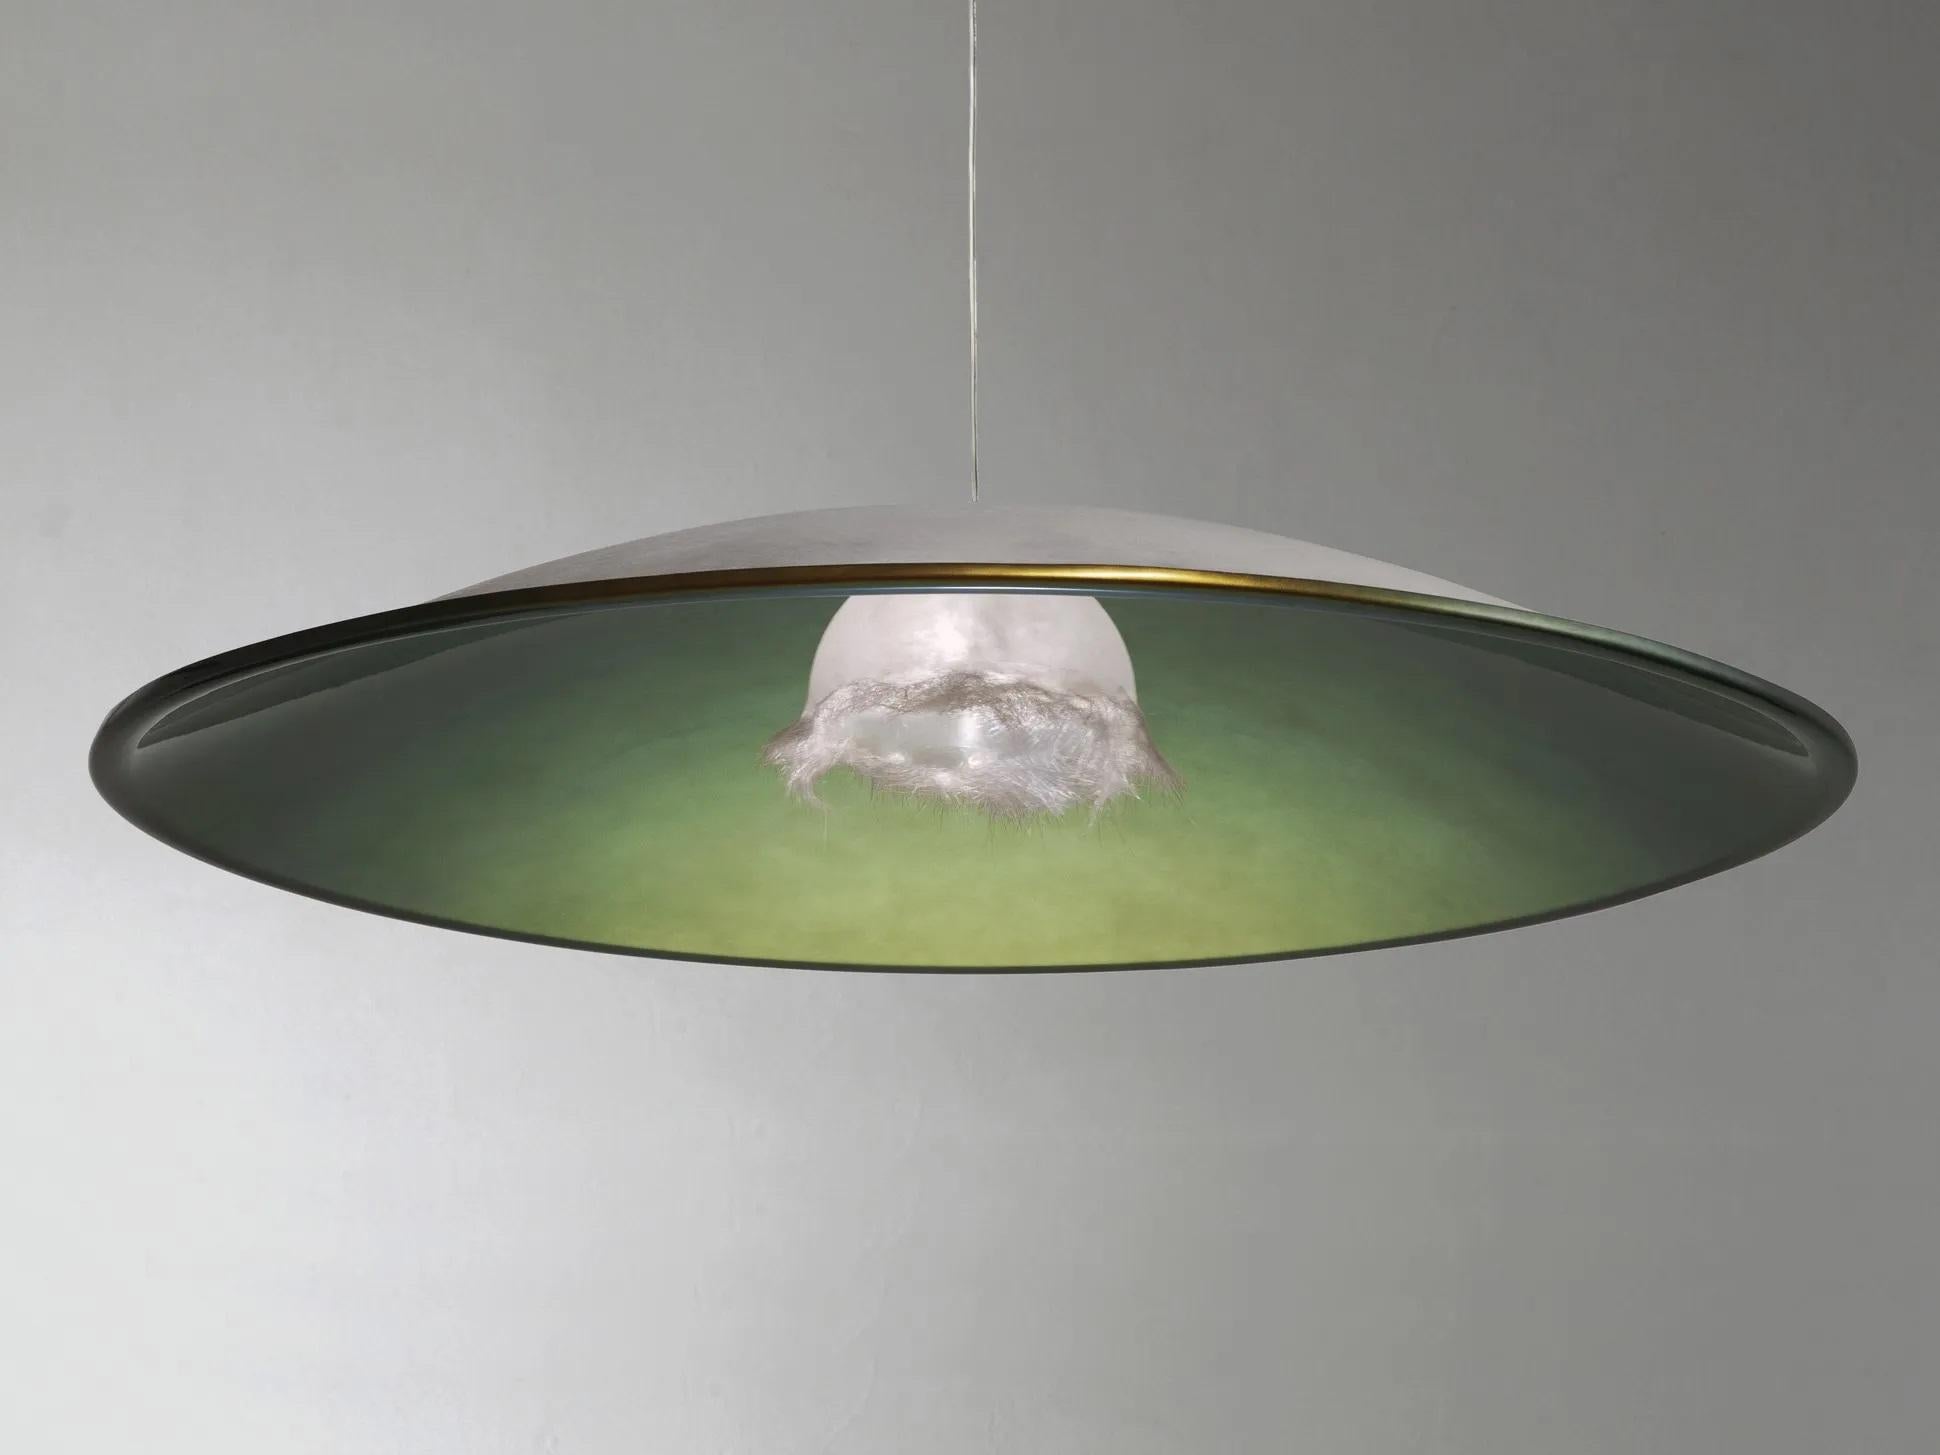 Flora pendant lamp by Imperfettolab
2011
Designer : Verter Turroni
Dimensions: Ø 187 x 32 cm
Materials: Fibreglass
Also available in white.

A suspension lamp that hides a gem around the source of its light. A finely crafted fiberglass